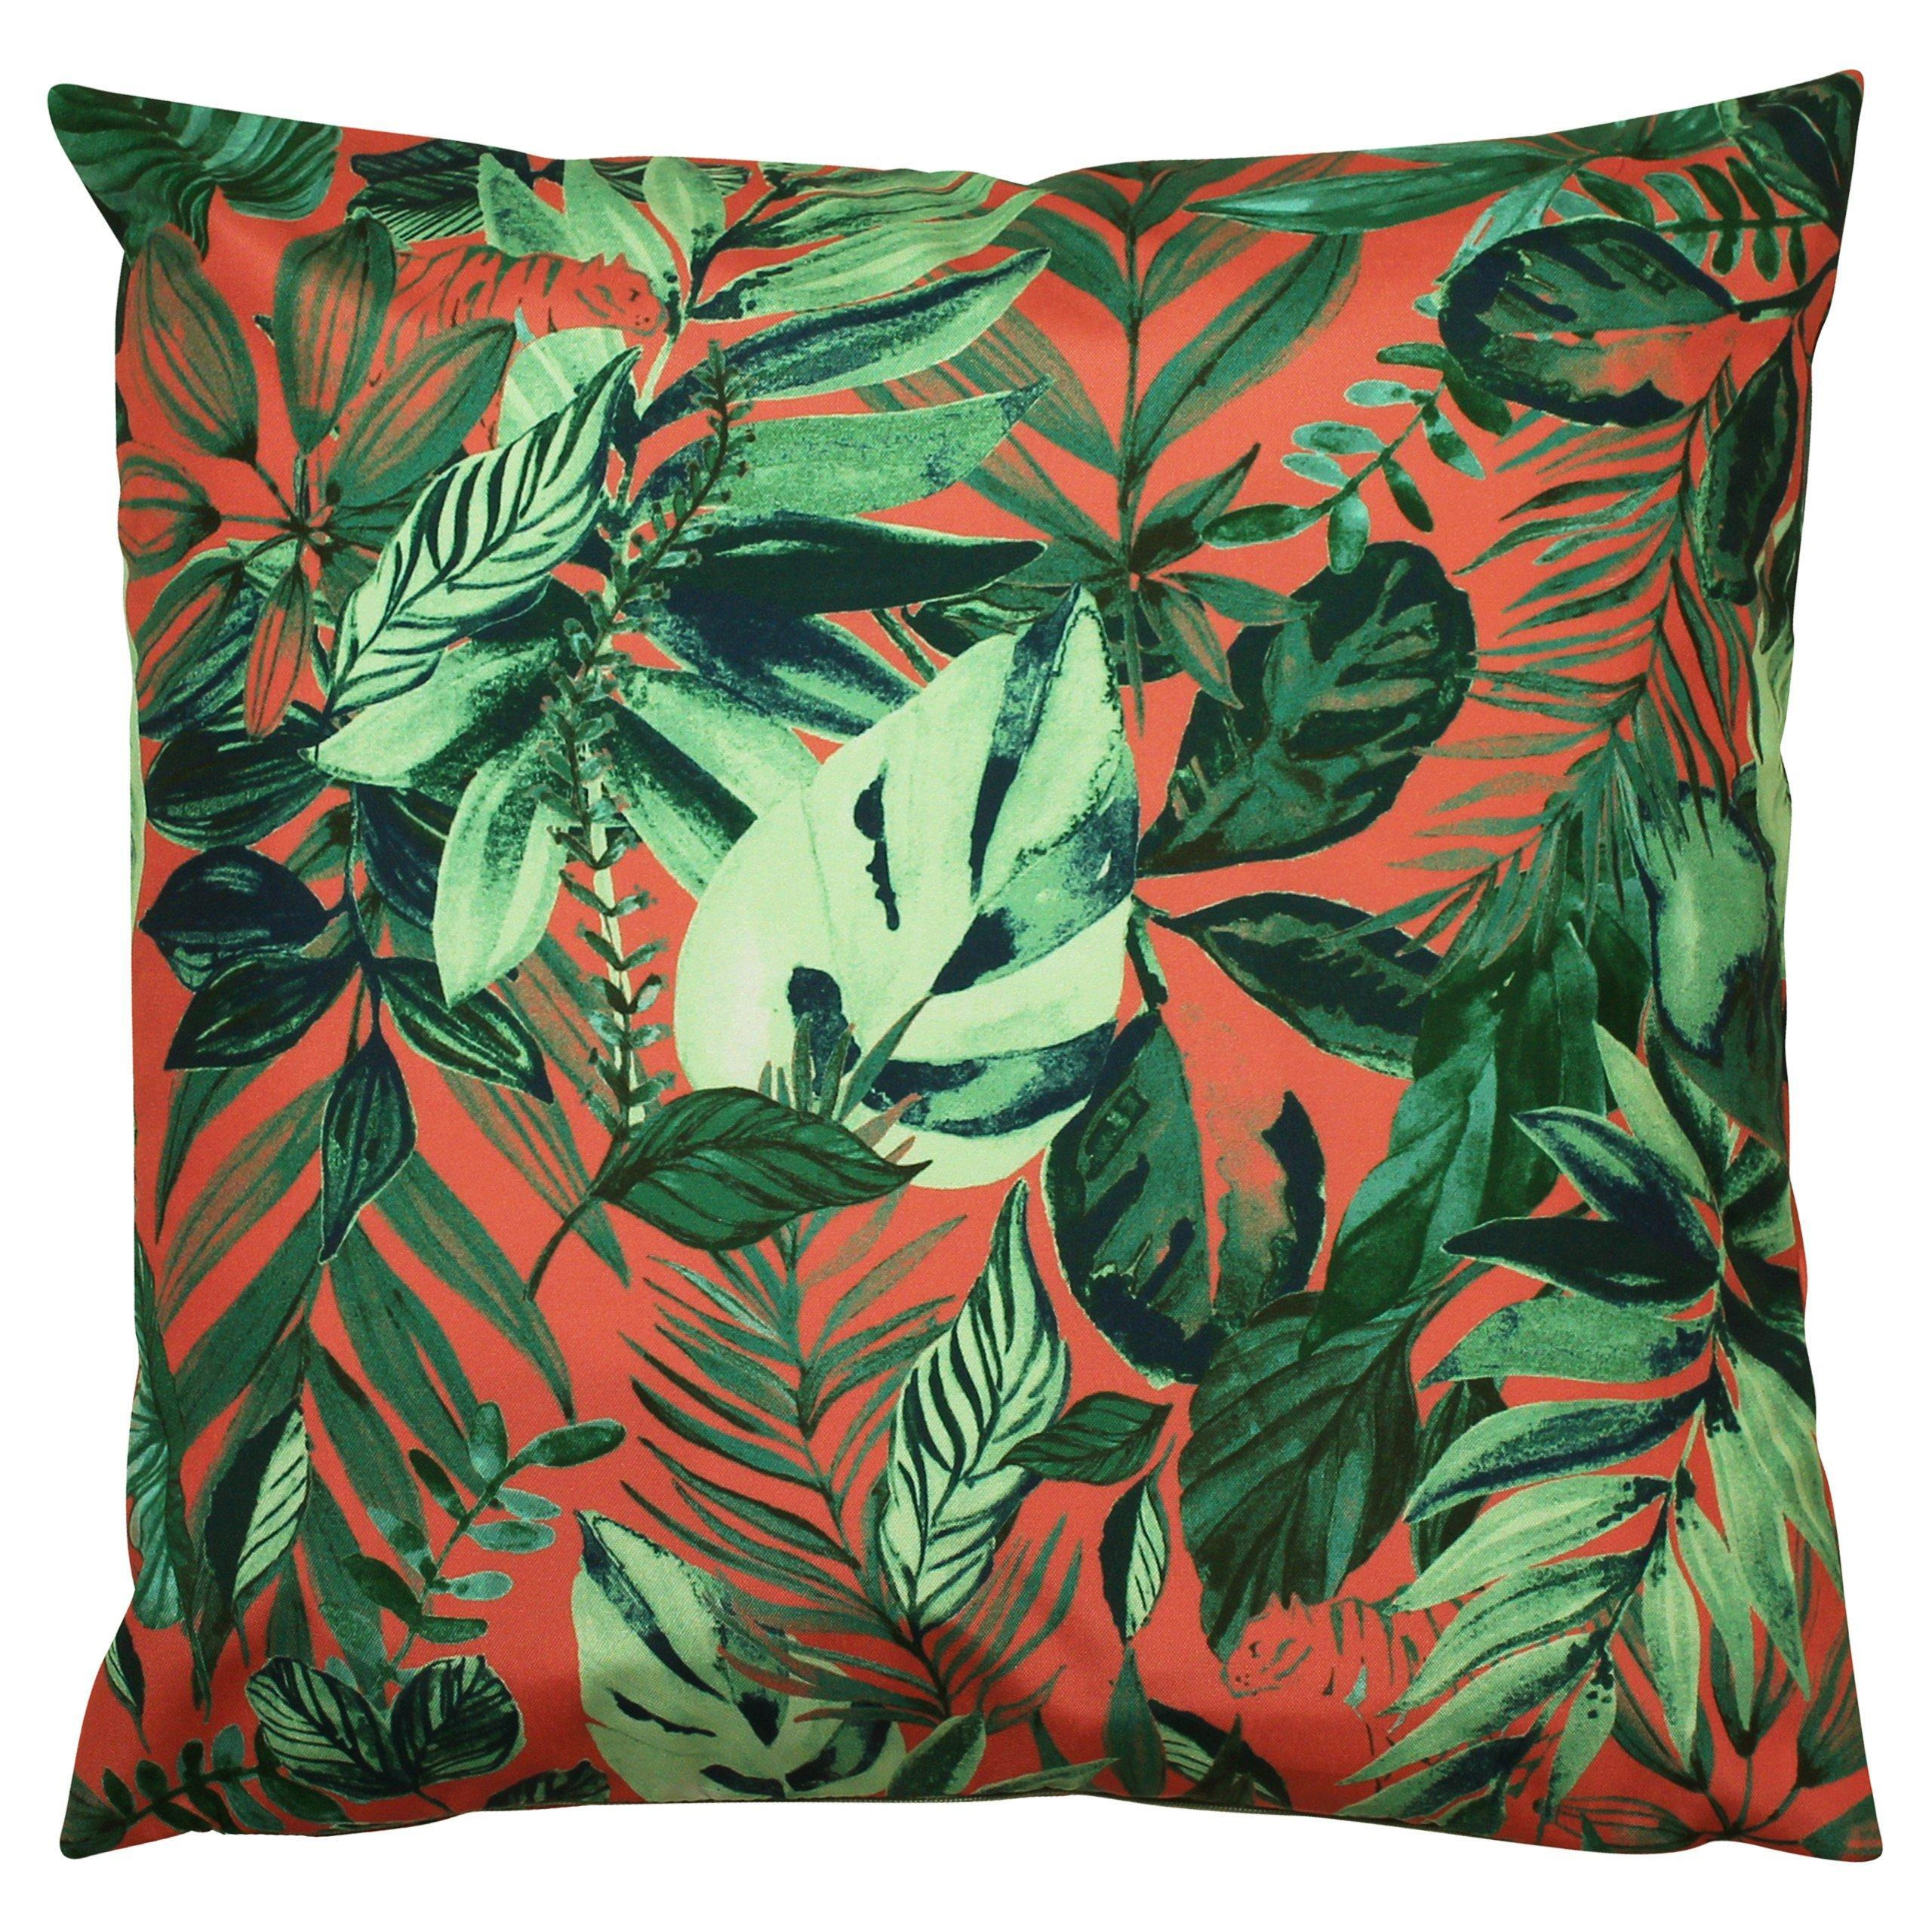 Psychedelic Jungle Polyester Filled Outdoor Cushion - image 1